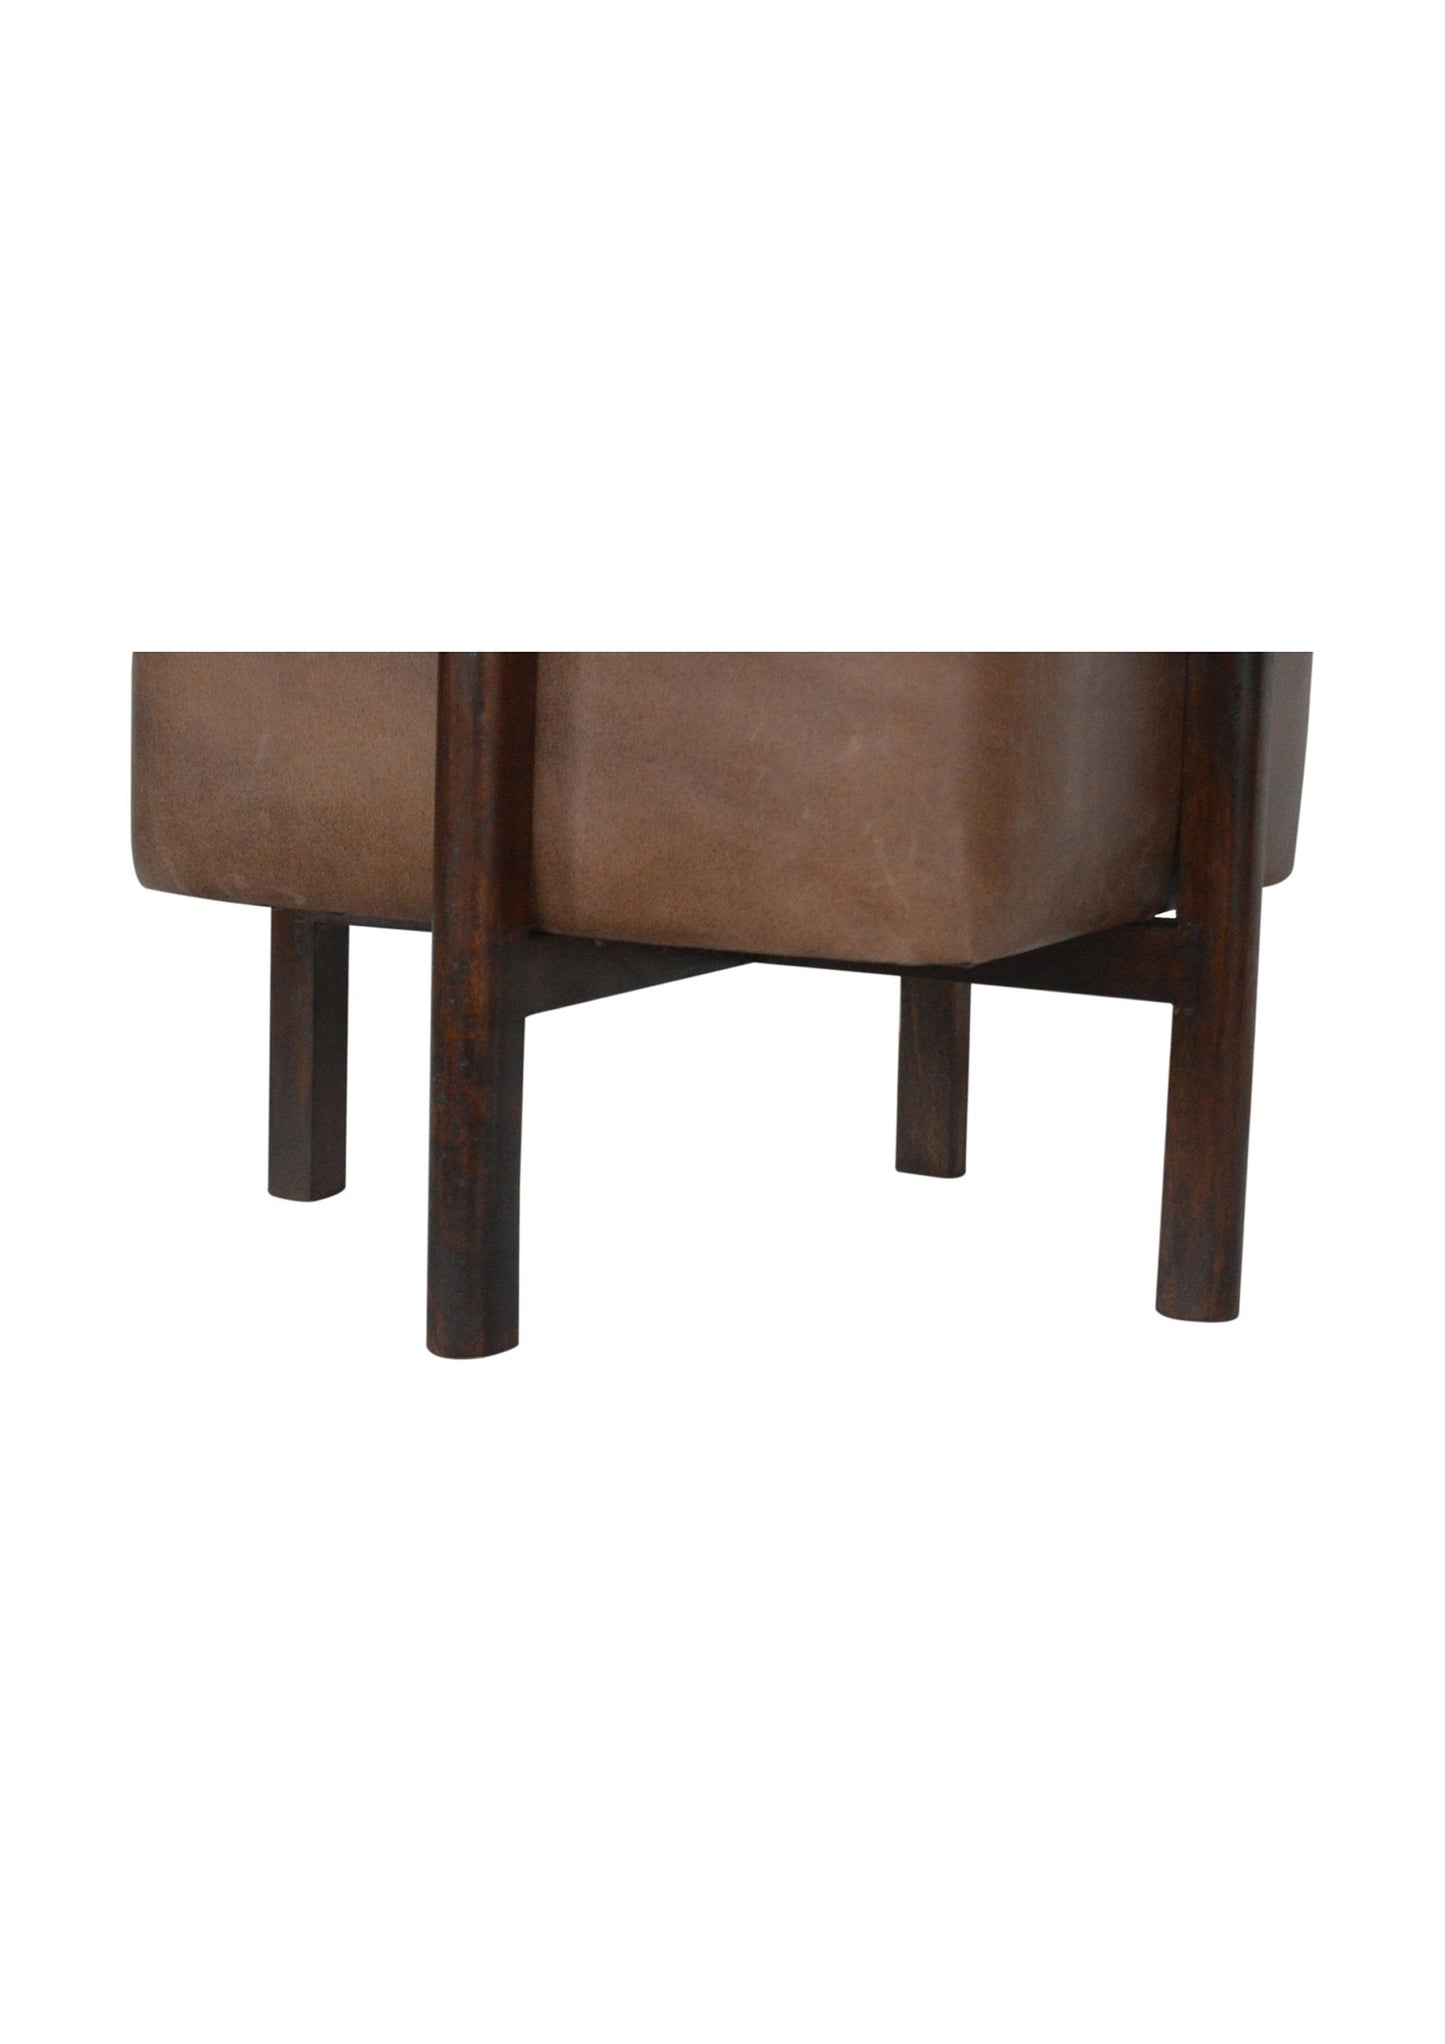 Mid Century Retro Style Brown Leather Footstool with Solid Wood Legs for Living Room Bedroom hallway